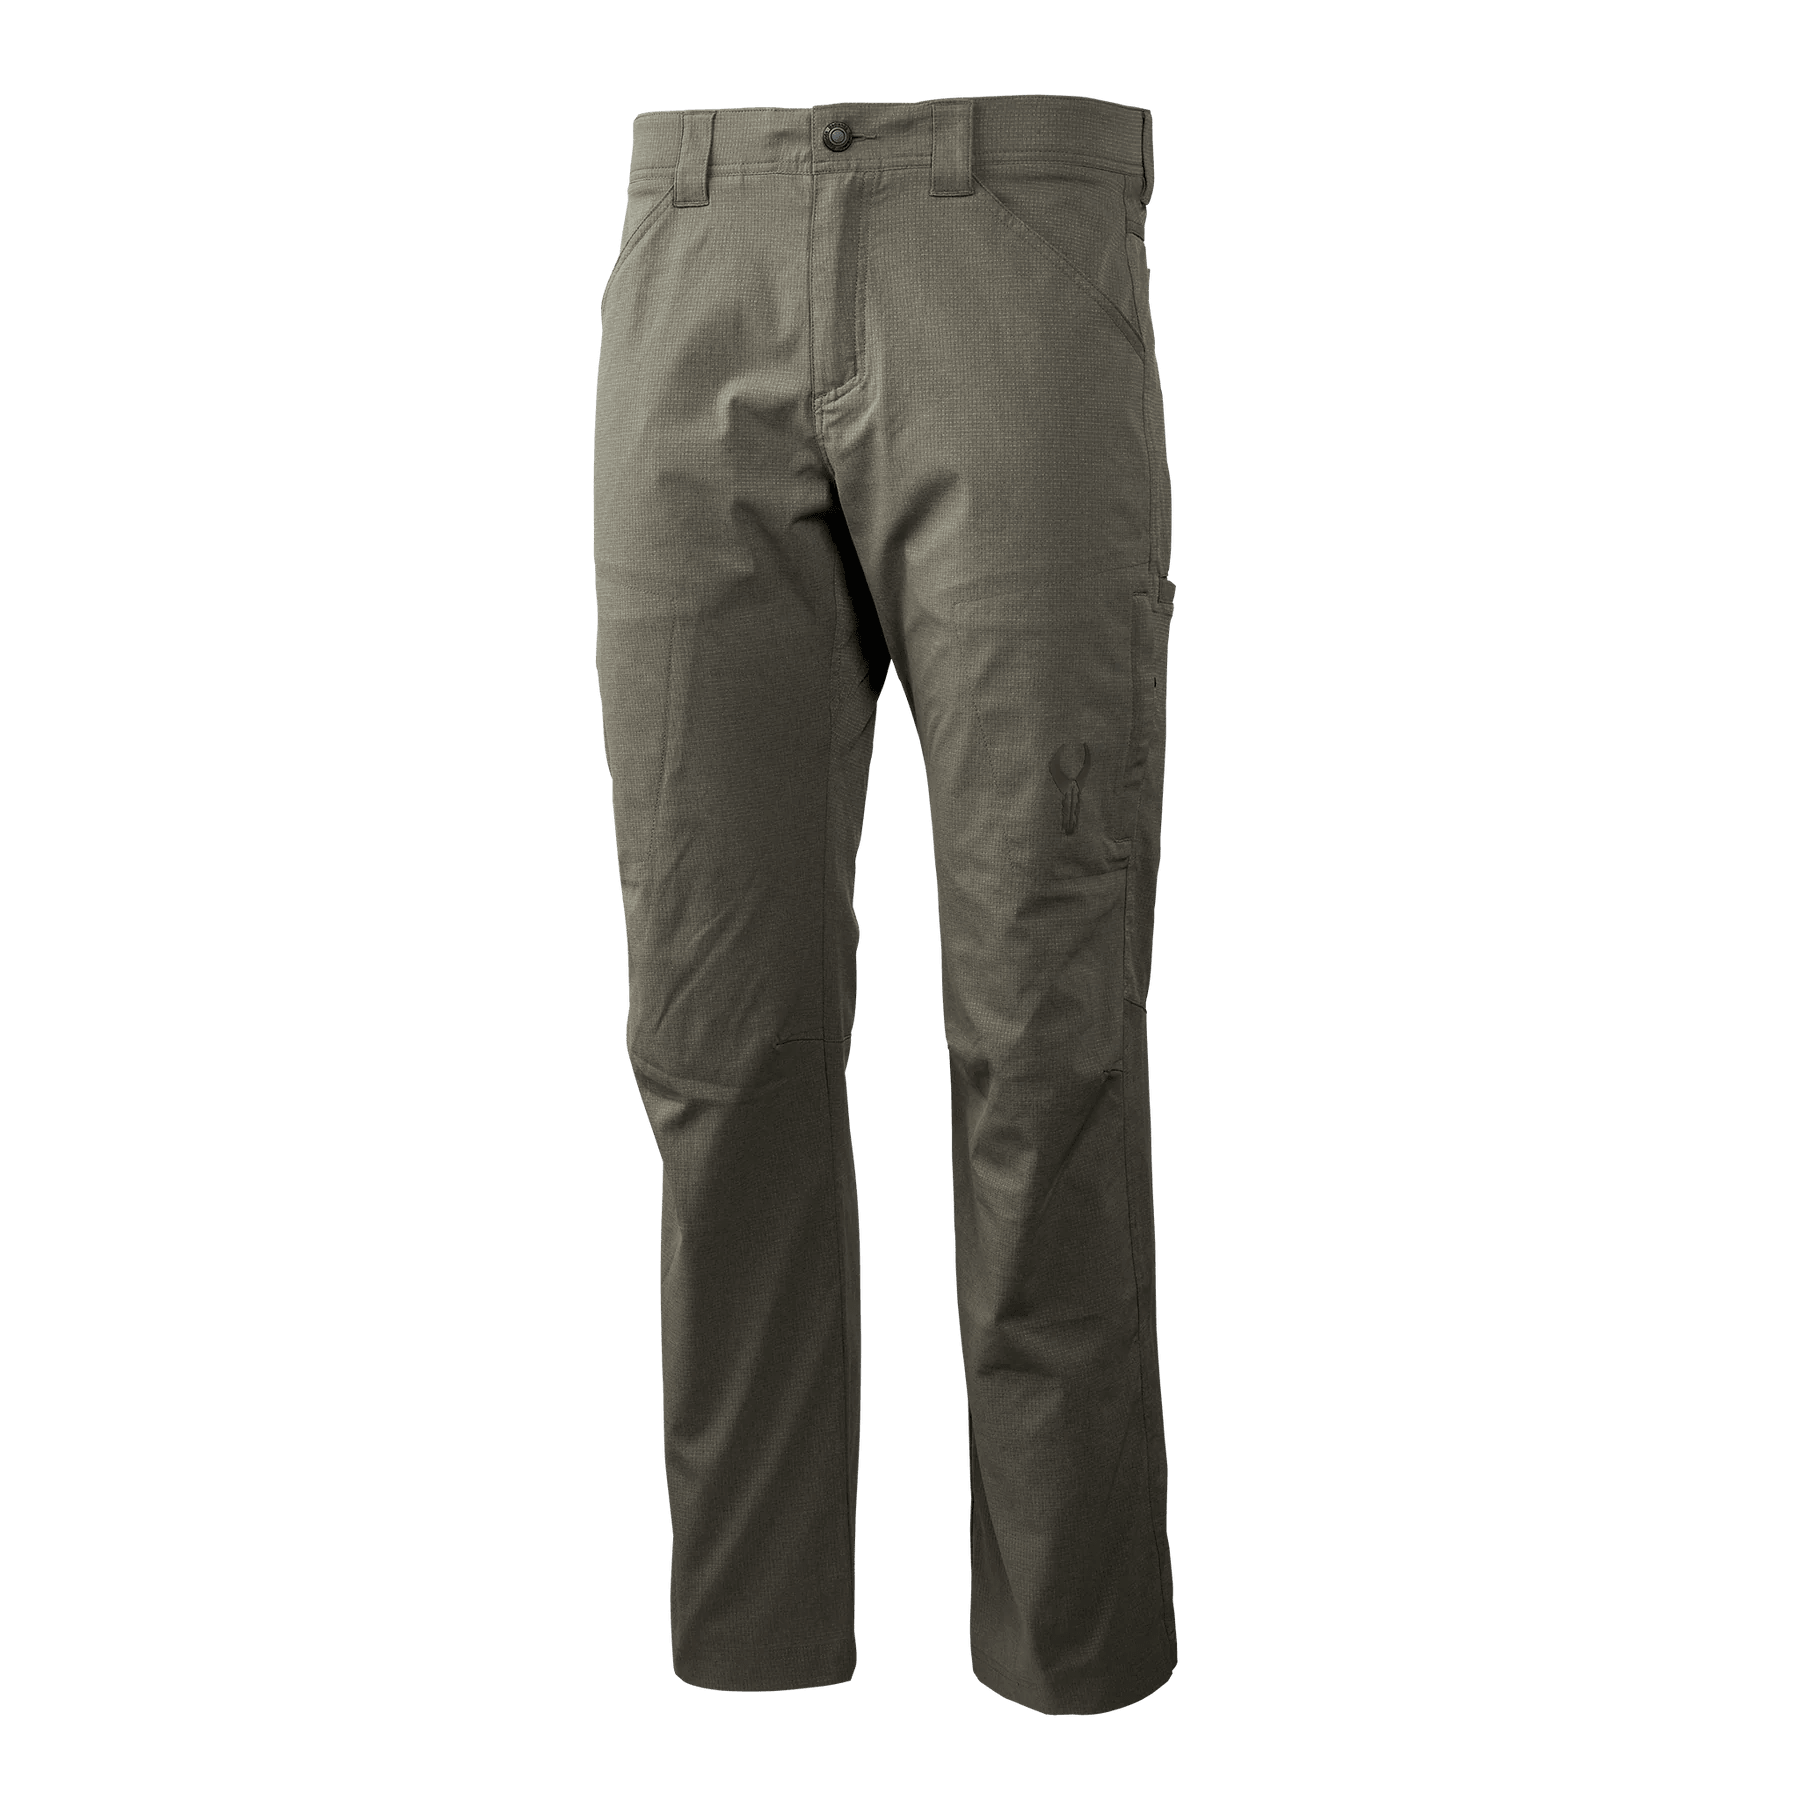 Badlands Andaire Pants - Leapfrog Outdoor Sports and Apparel